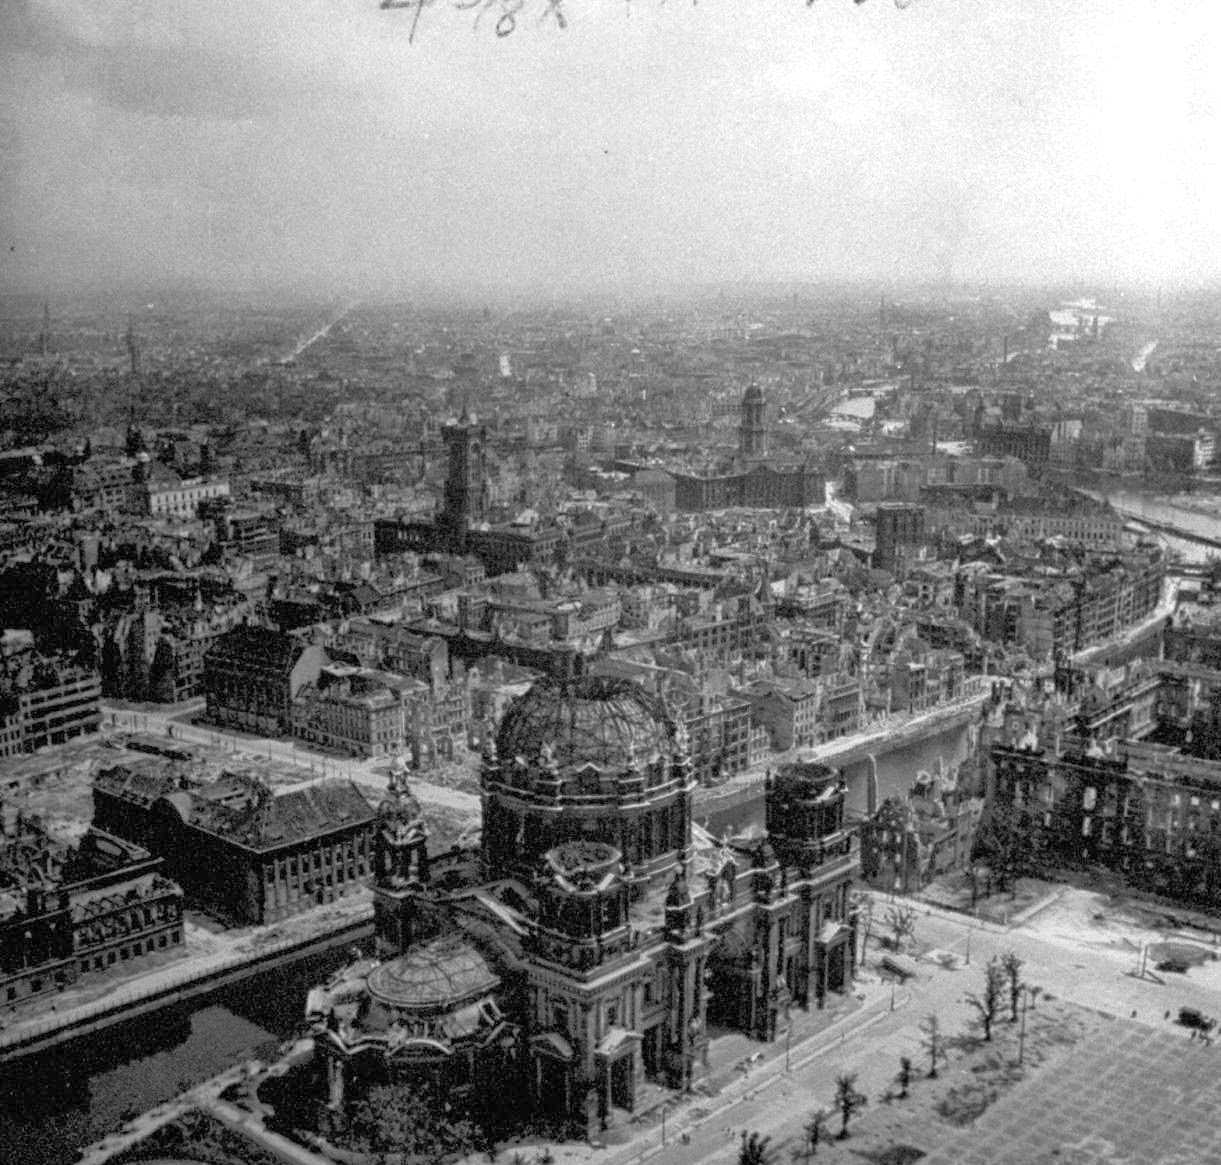 Powerful Photos Showcasing the Ruins of Berlin in the Aftermath of World War II